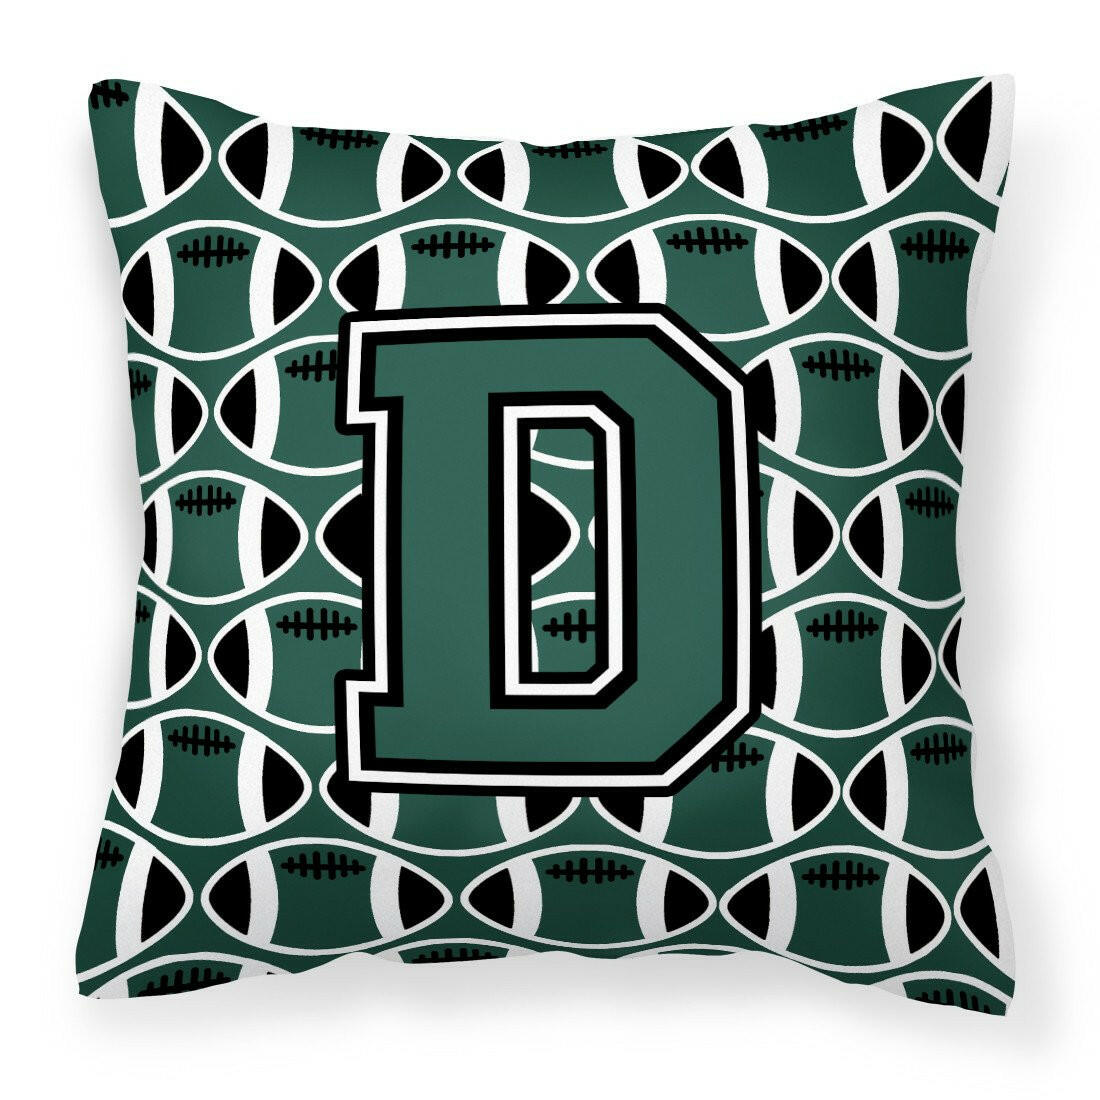 Letter D Football Green and White Fabric Decorative Pillow CJ1071-DPW1414 by Caroline's Treasures